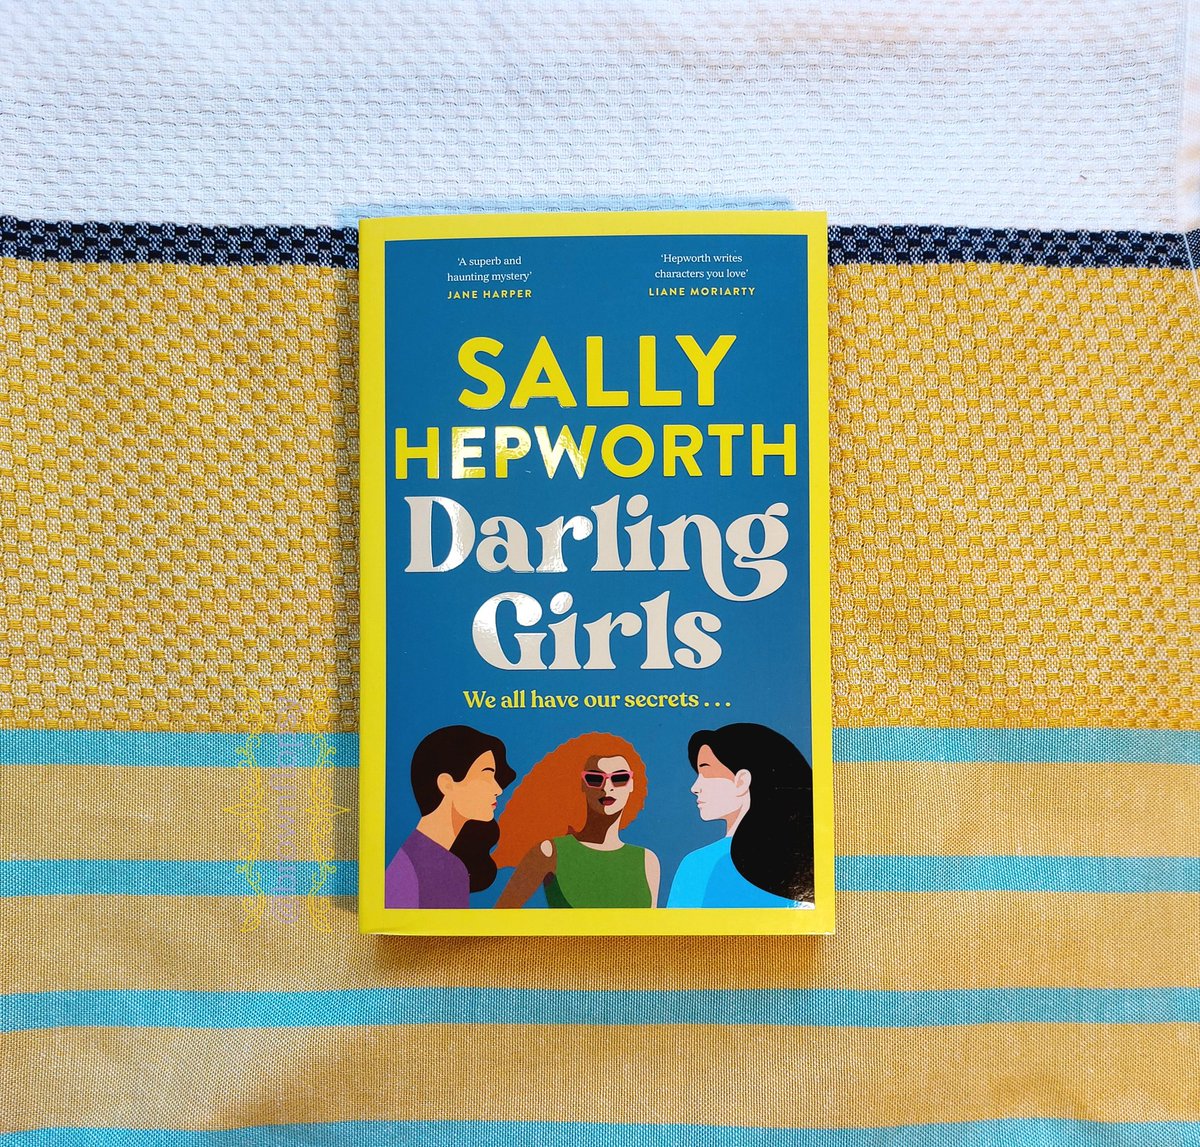 Thank you to the lovely @chlodavies97 for this copy of #DarlingGirls by @sallyhepworth which we are reading at @Squadpod3 as this month's fab #SquadPodBookClub pick. Out 25th April from @panmacmillan 🎉 I cannot wait to dive in... heard lots of great things! 🤩